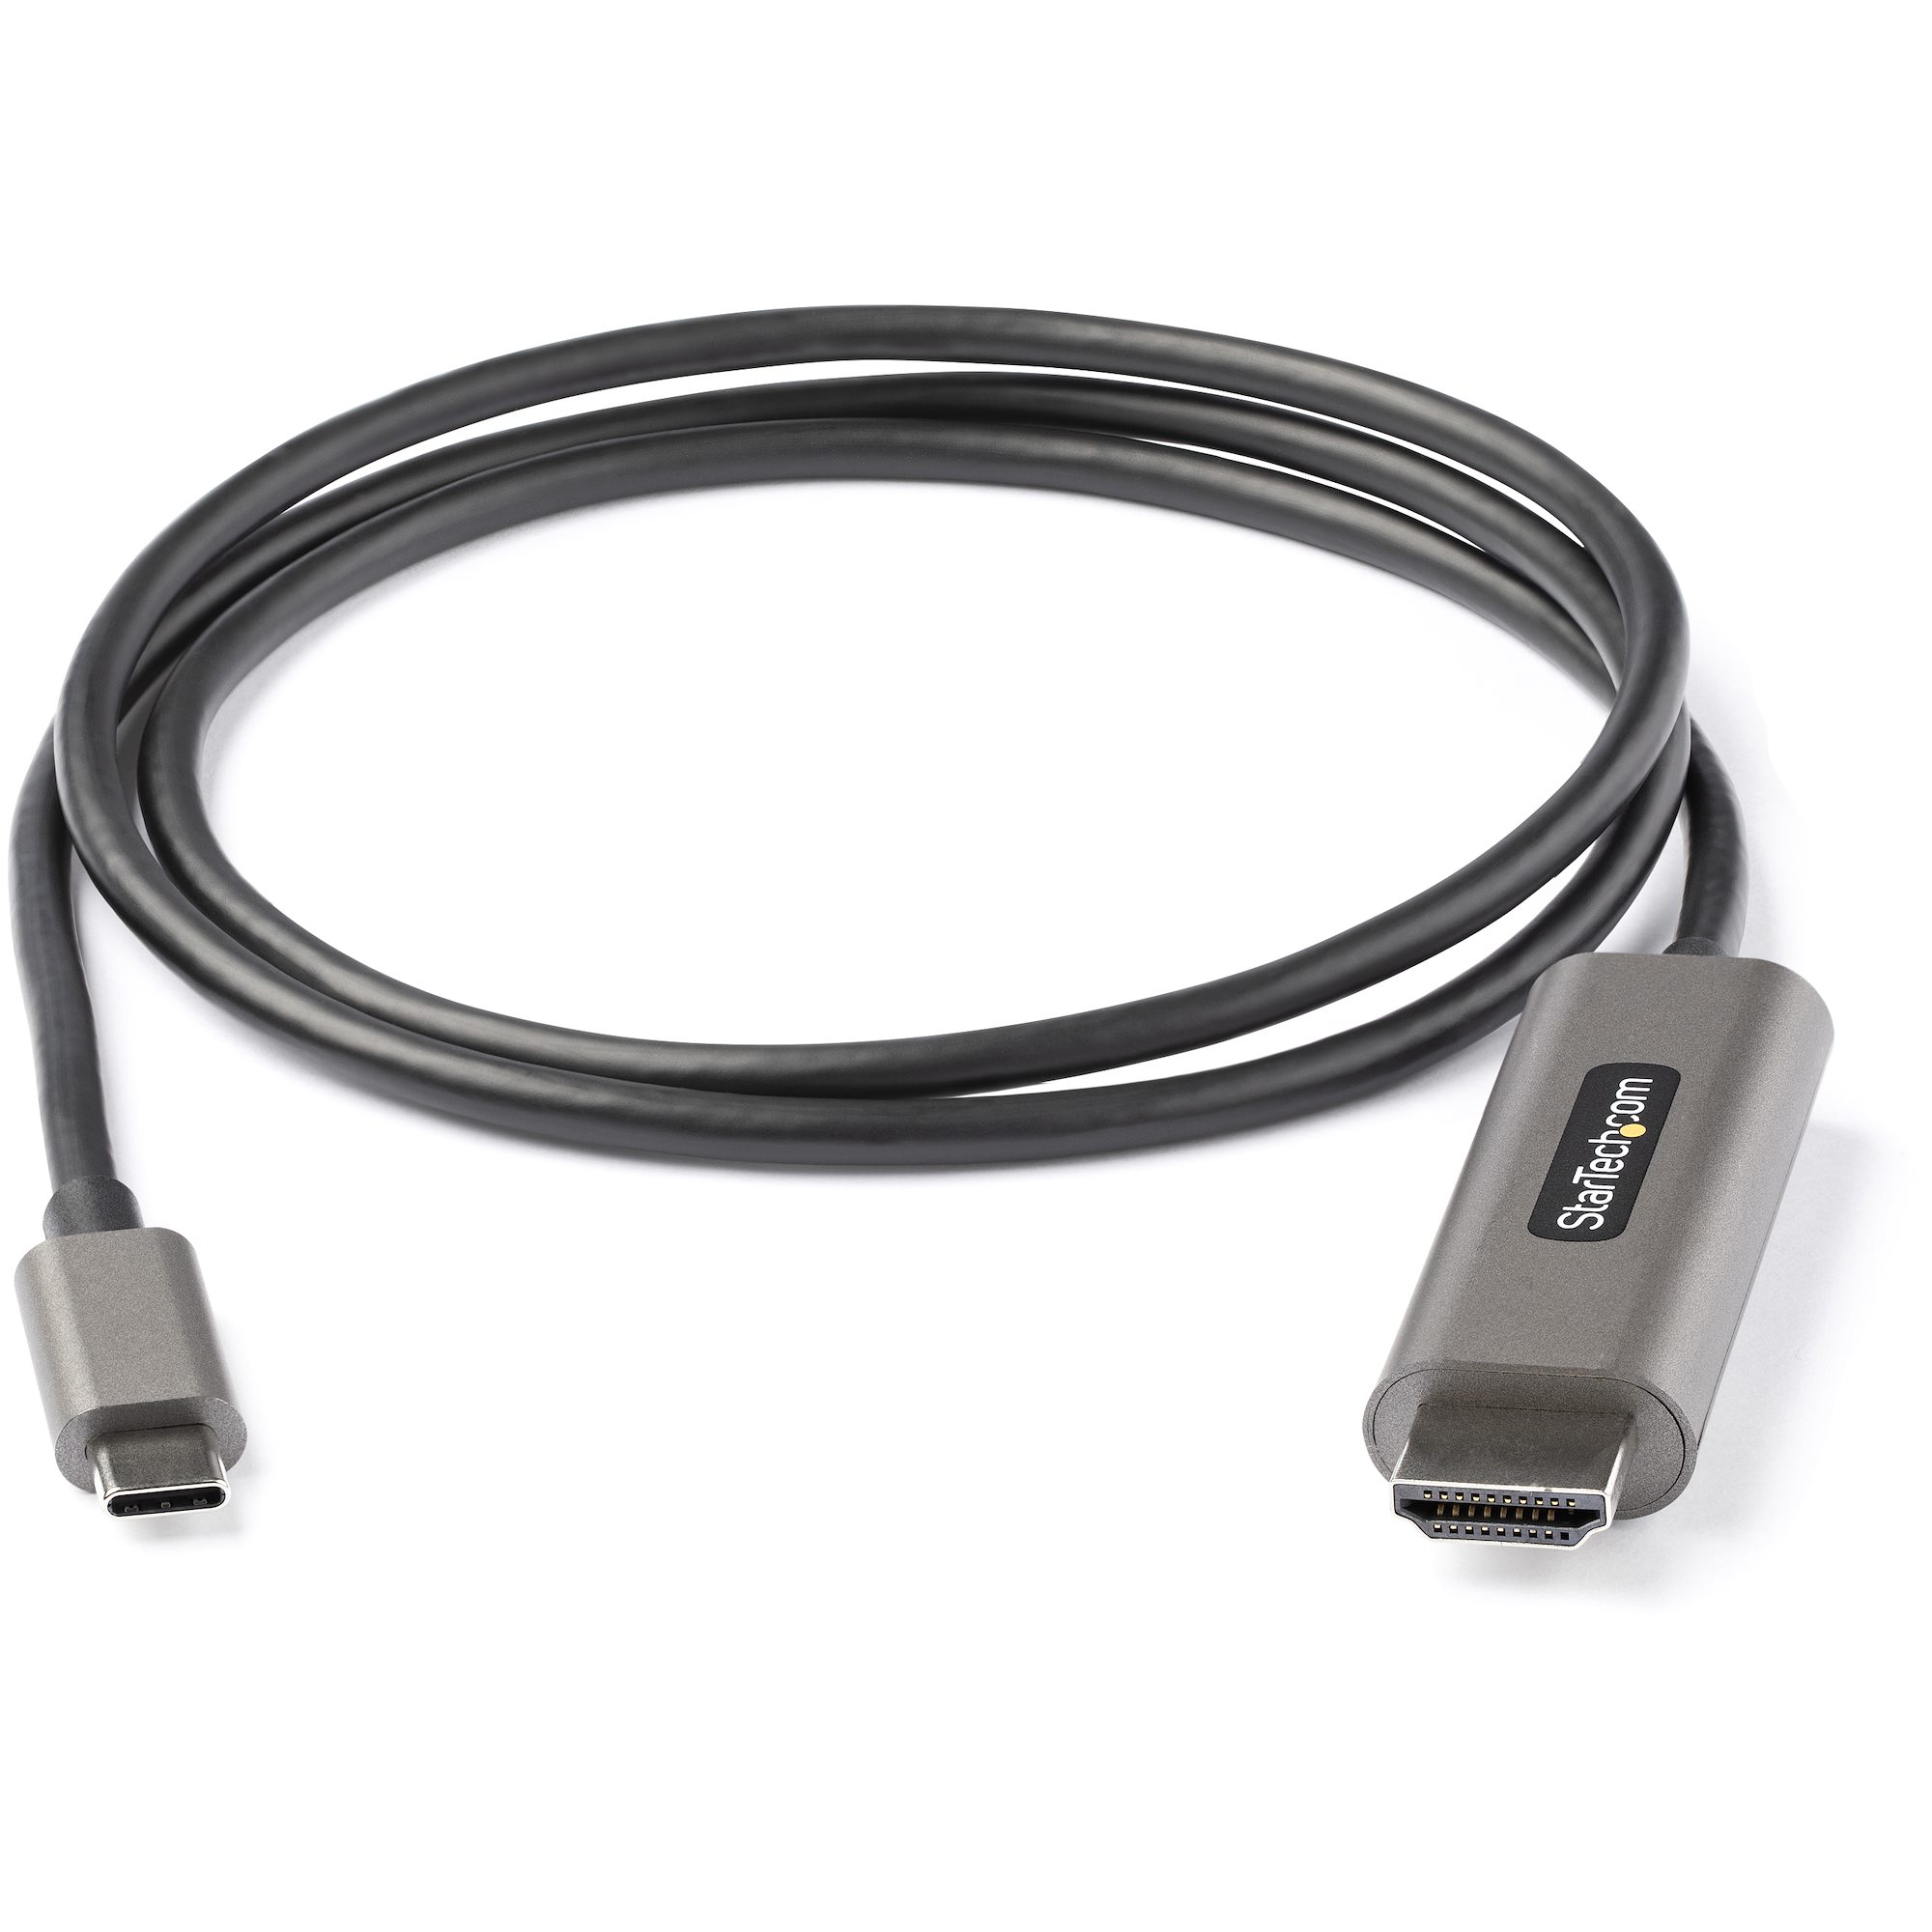 C-USBC/HM USB Type–C (M) to HDMI (M) Cable